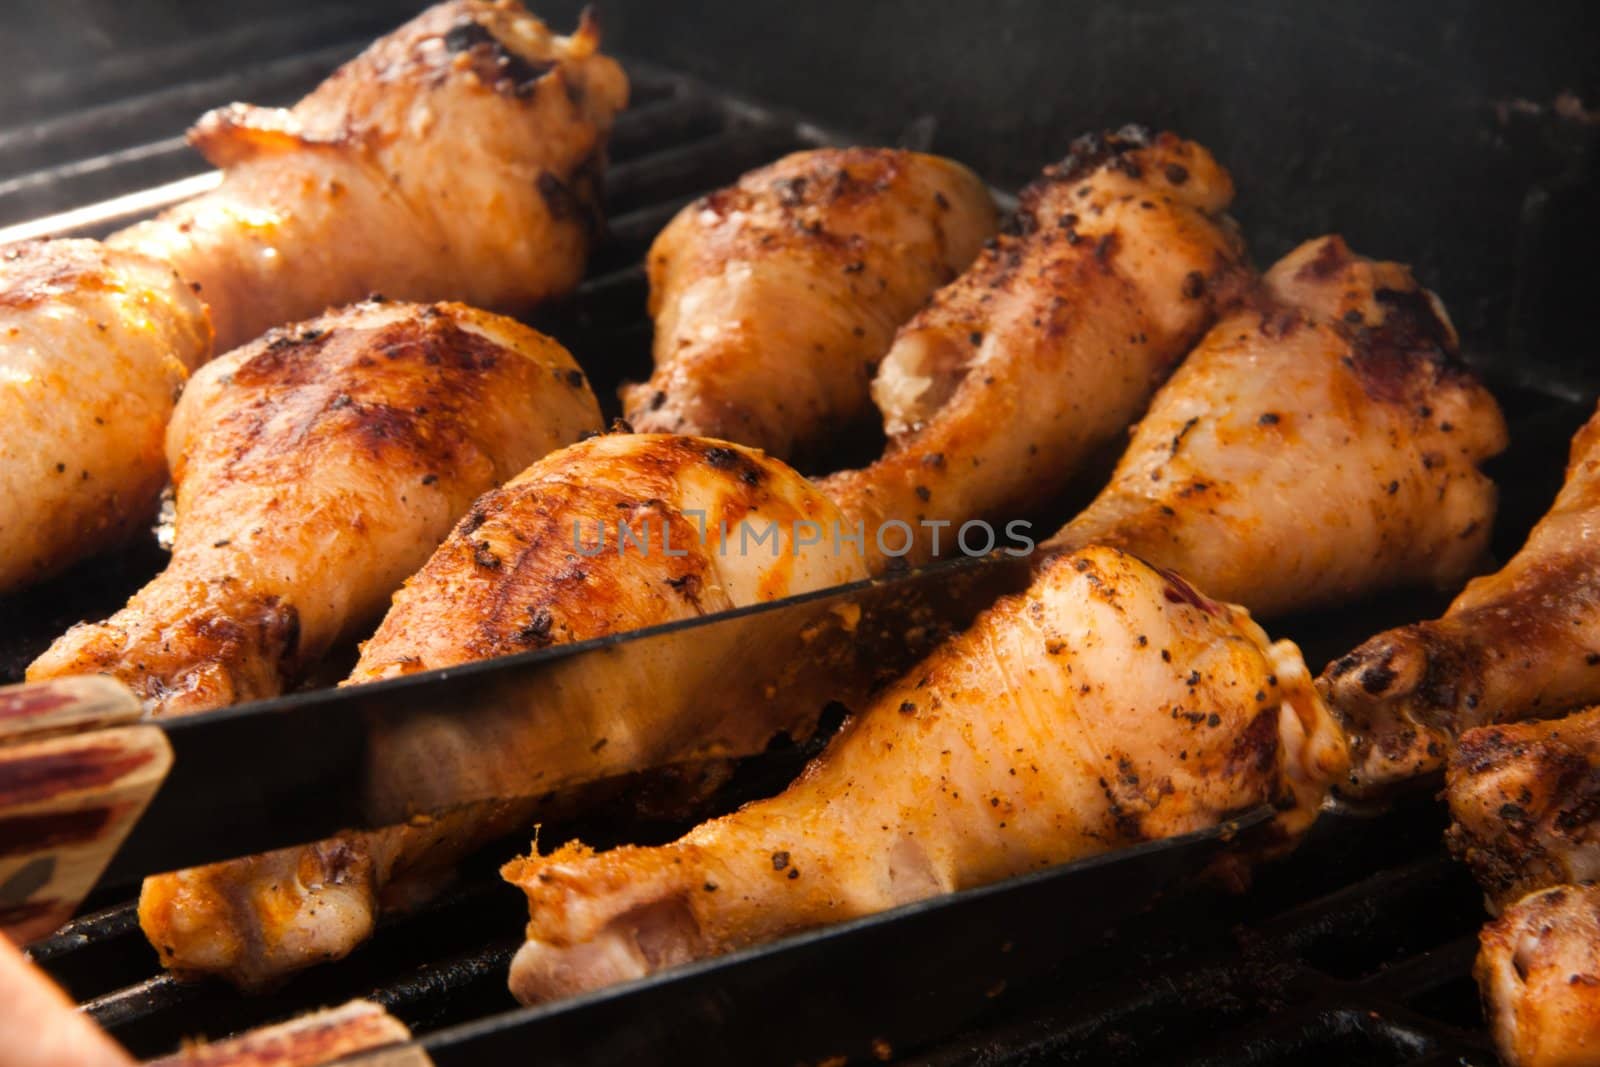 Delicious Barbeque Drumsticks by RachelD32